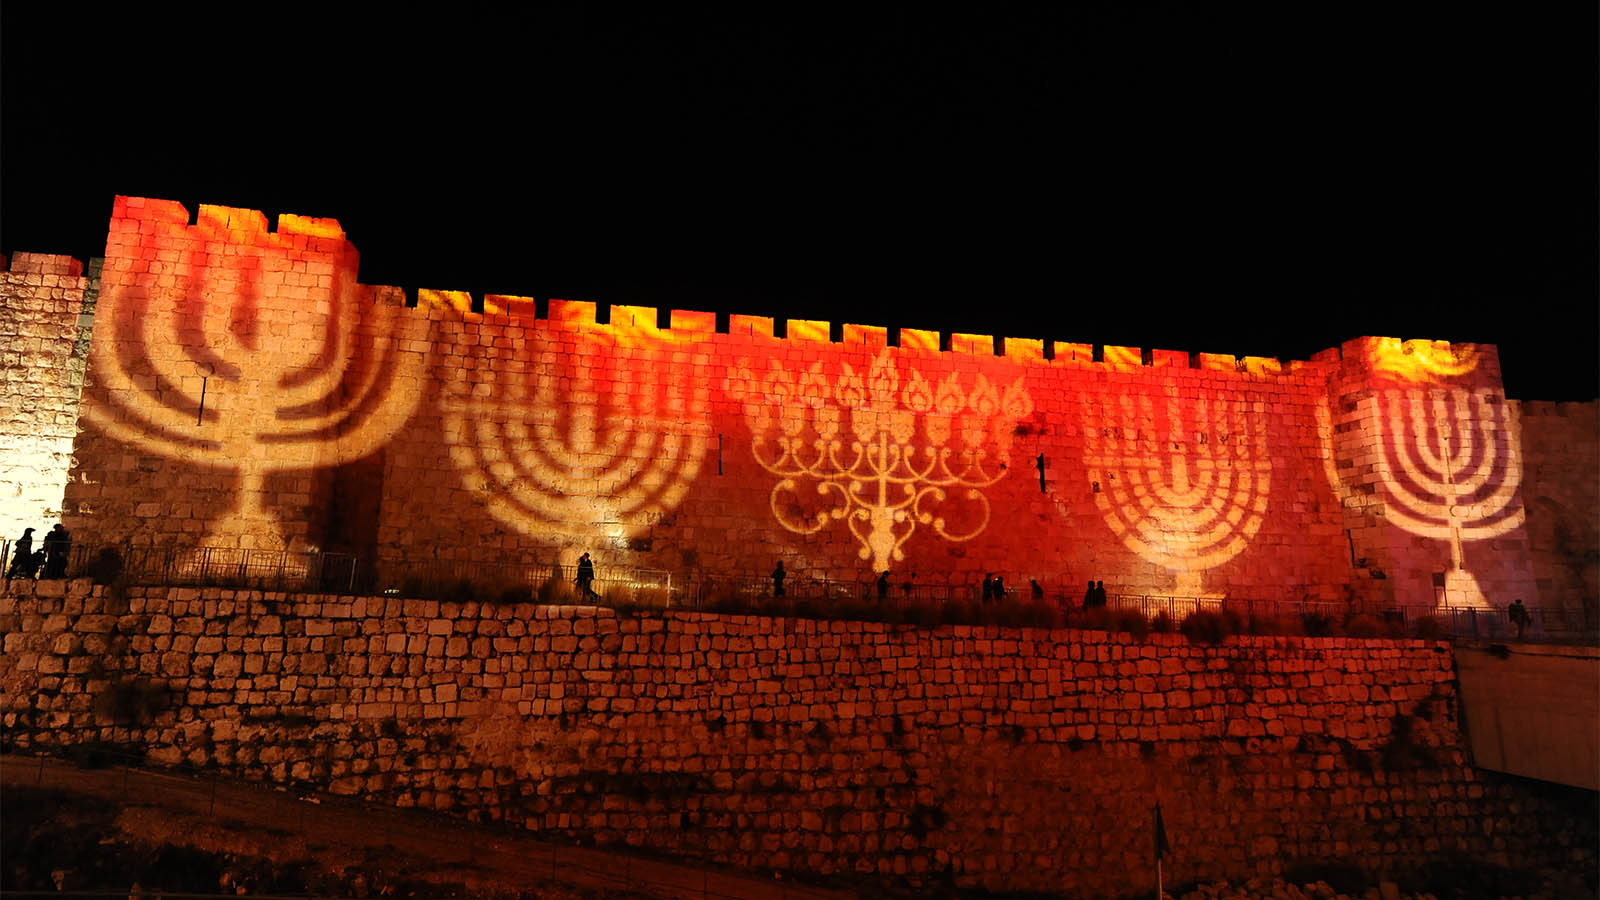 Pepole walk past the walls of Jerusalem's Old City illuminated with projection showing Menorah and Dreidels during the Jewish holiday of Hanukkah. December 24, 2016 (Photograph by Mendy Hechtman/Flash90)